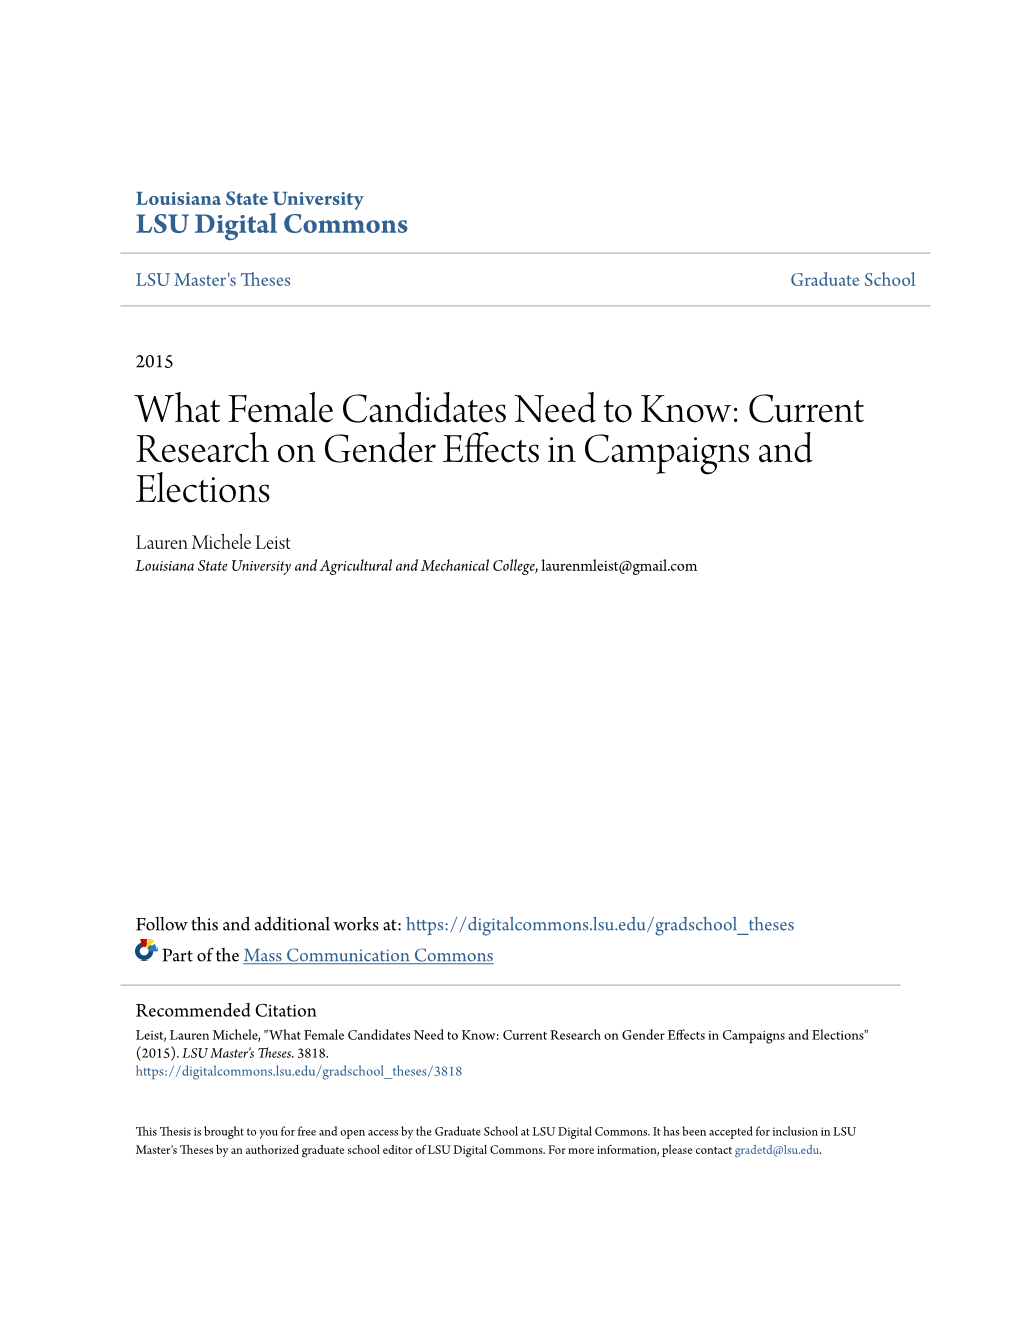 Current Research on Gender Effects in Campaigns and Elections